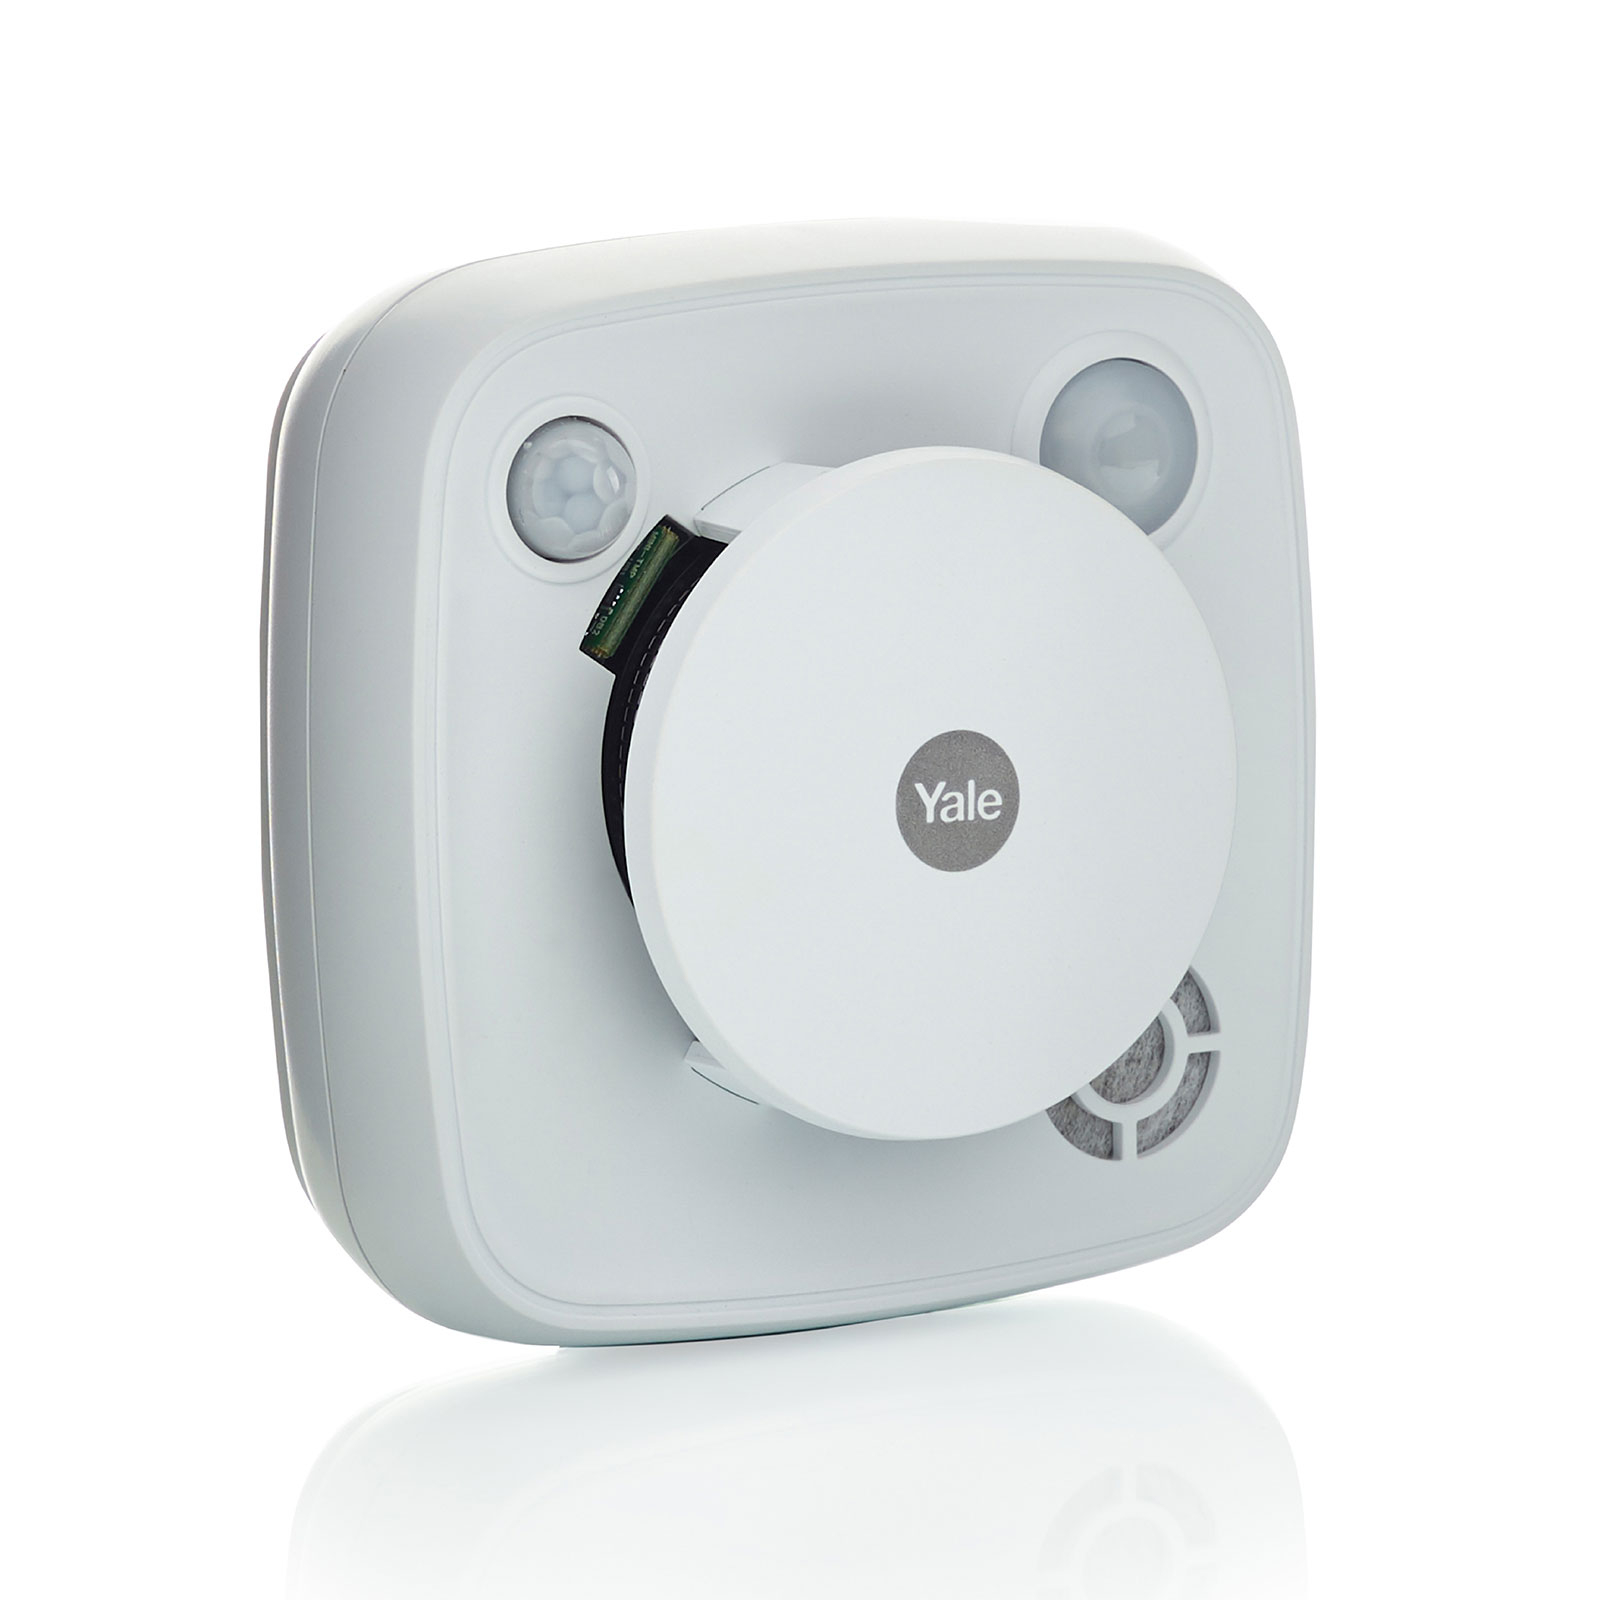 Yale Sync smoke, heat and motion detector